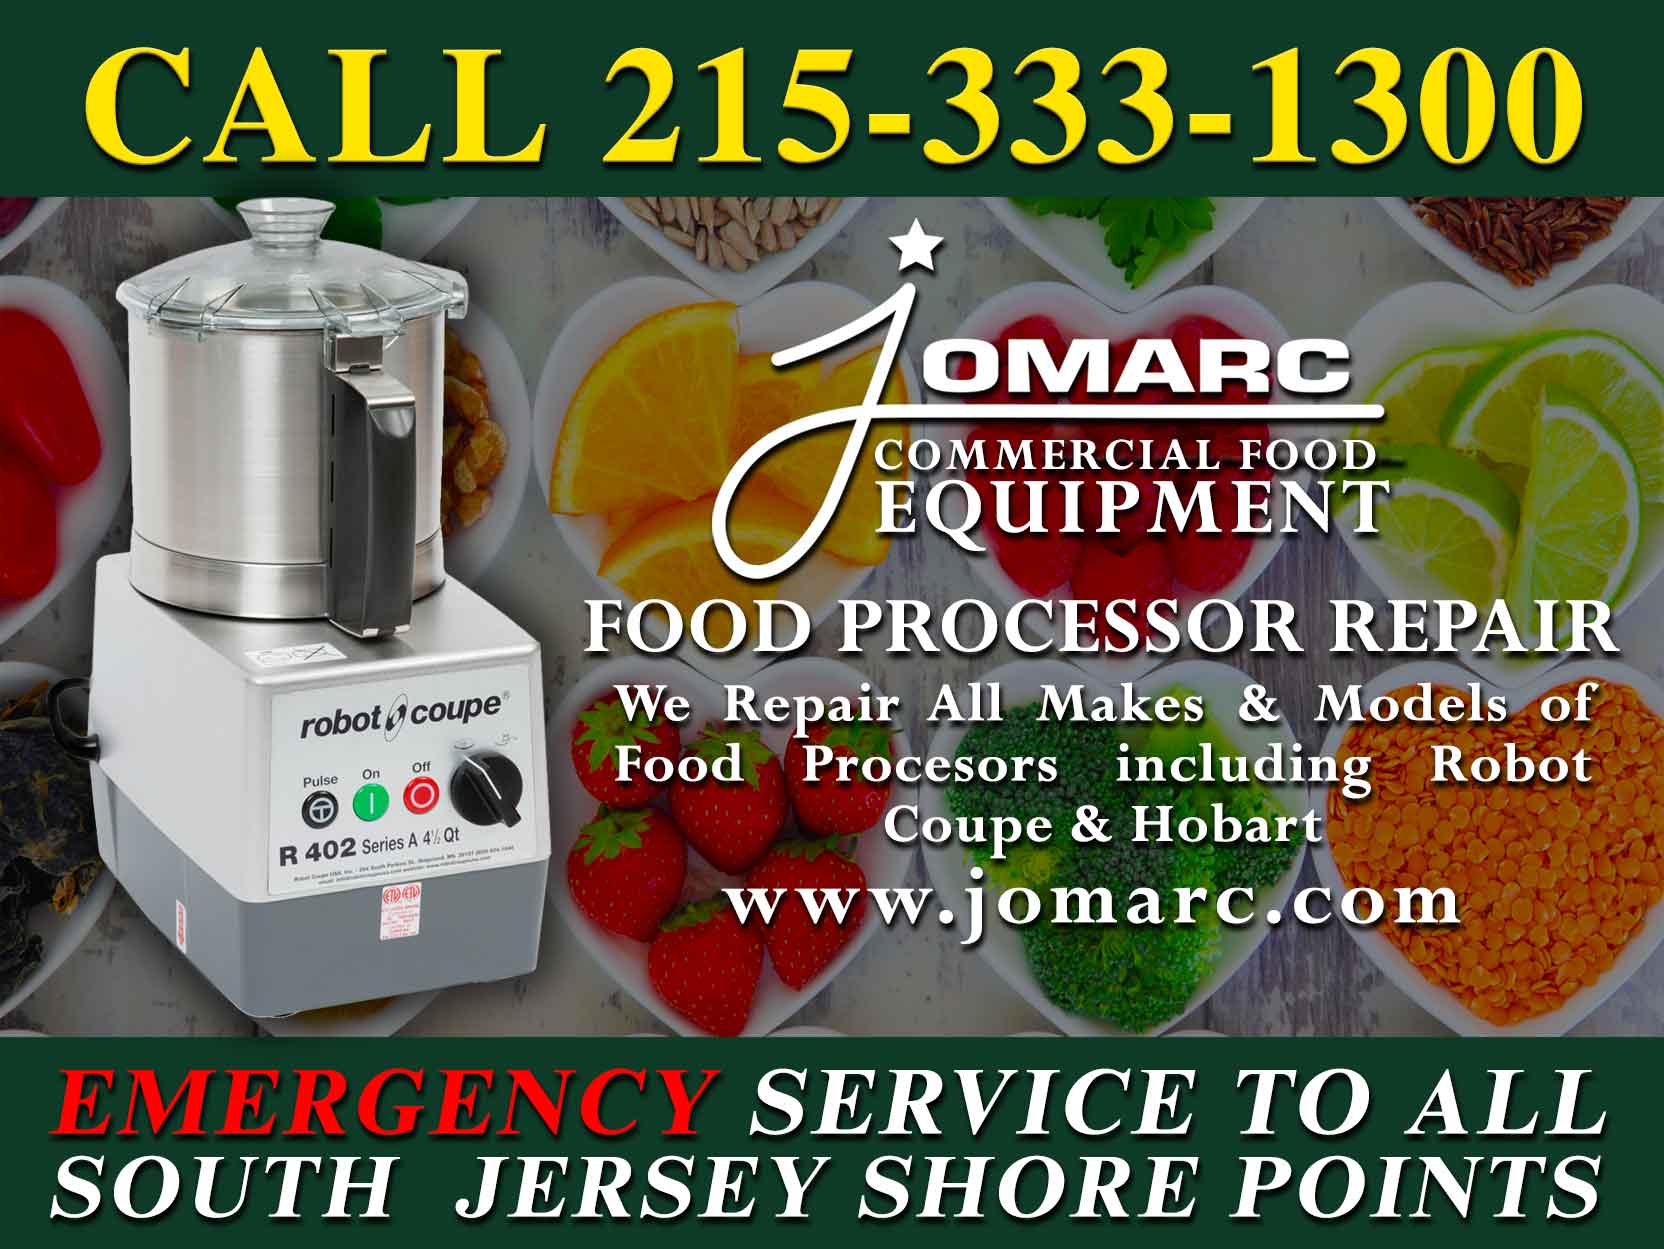 Commercial Steamer Repair New Jersey Cherry Hill Atlantic City Cape May Steam Kettles Portion Steamers Fast Steamers Microwave Steamers Steam Generators